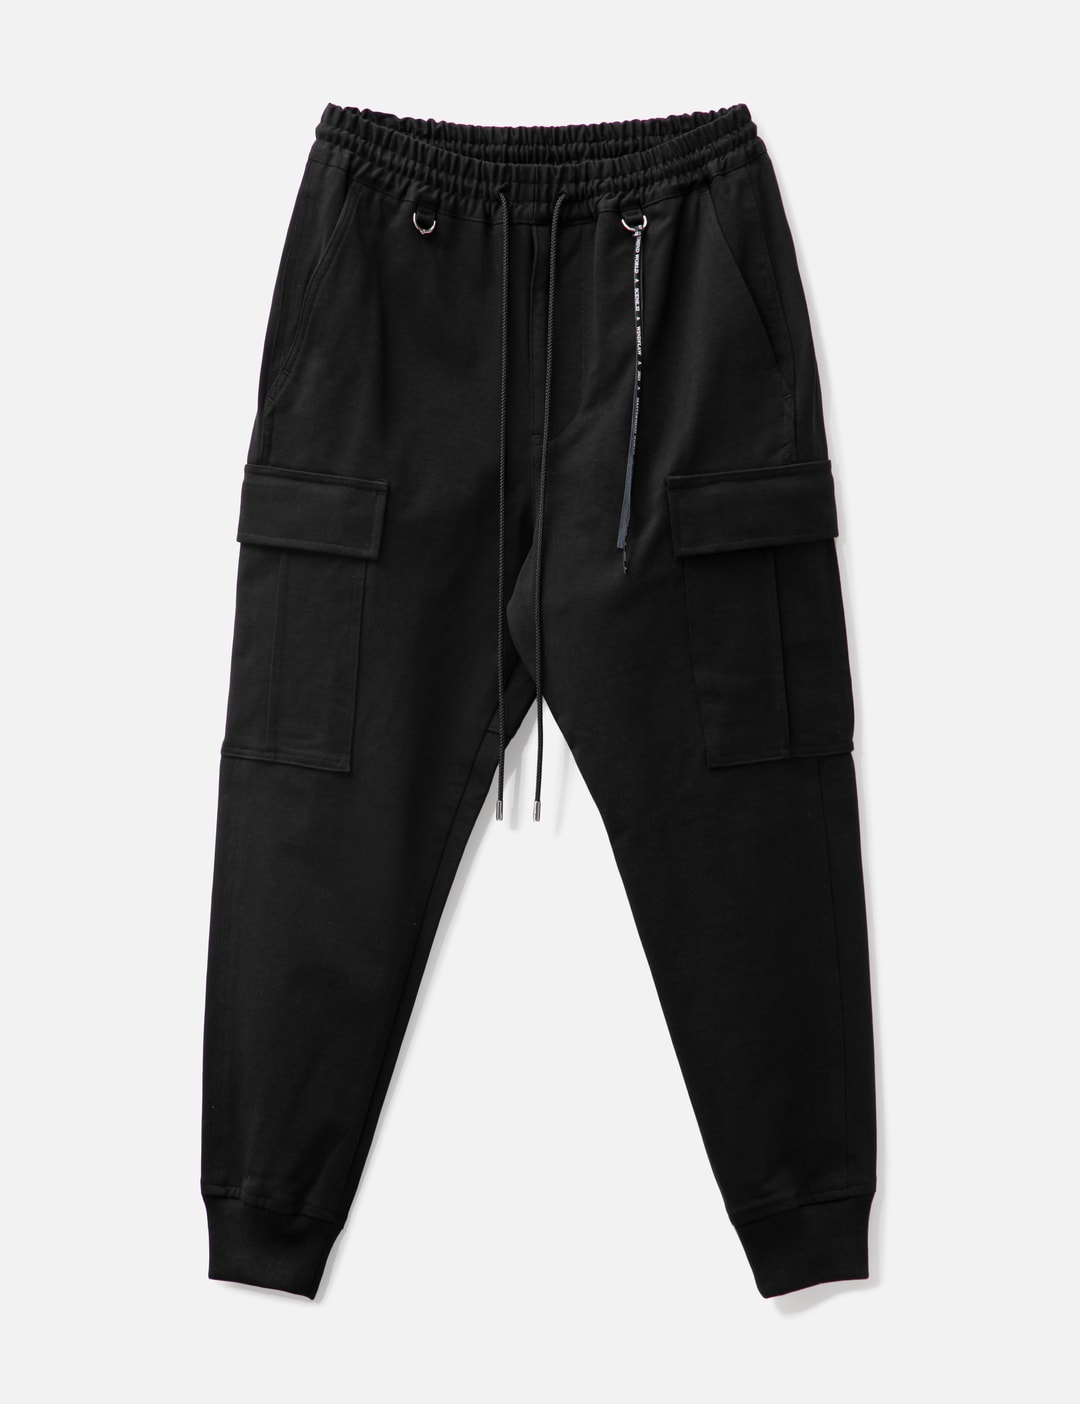 Mastermind World - Slim Fit Cargo Jogger Pants | HBX - Globally Curated ...